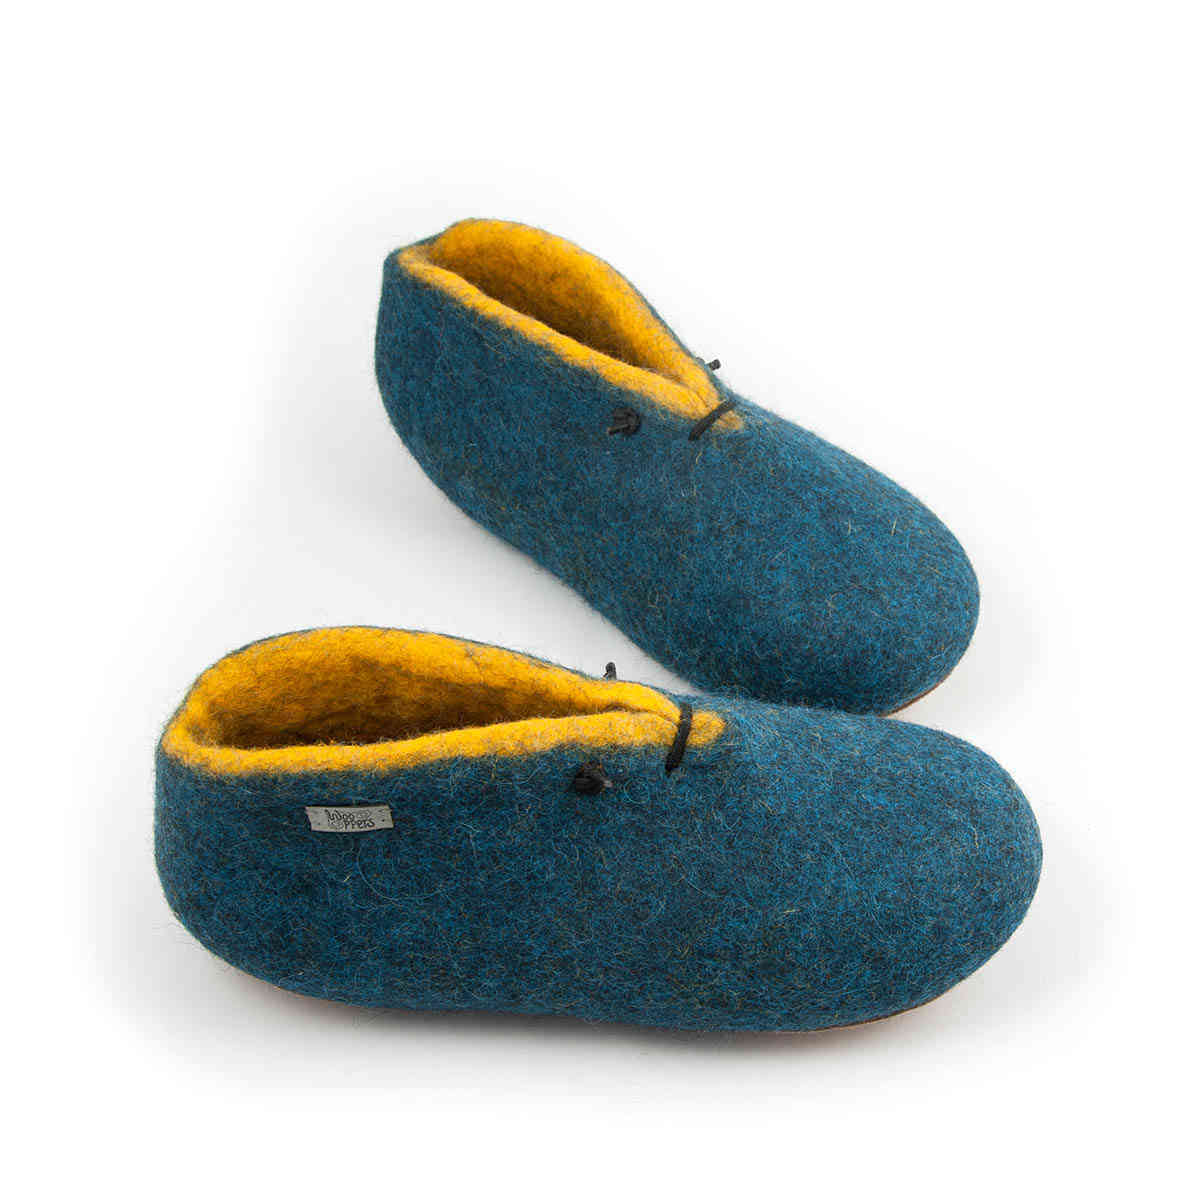 Slipper boots petrol blue with yellow